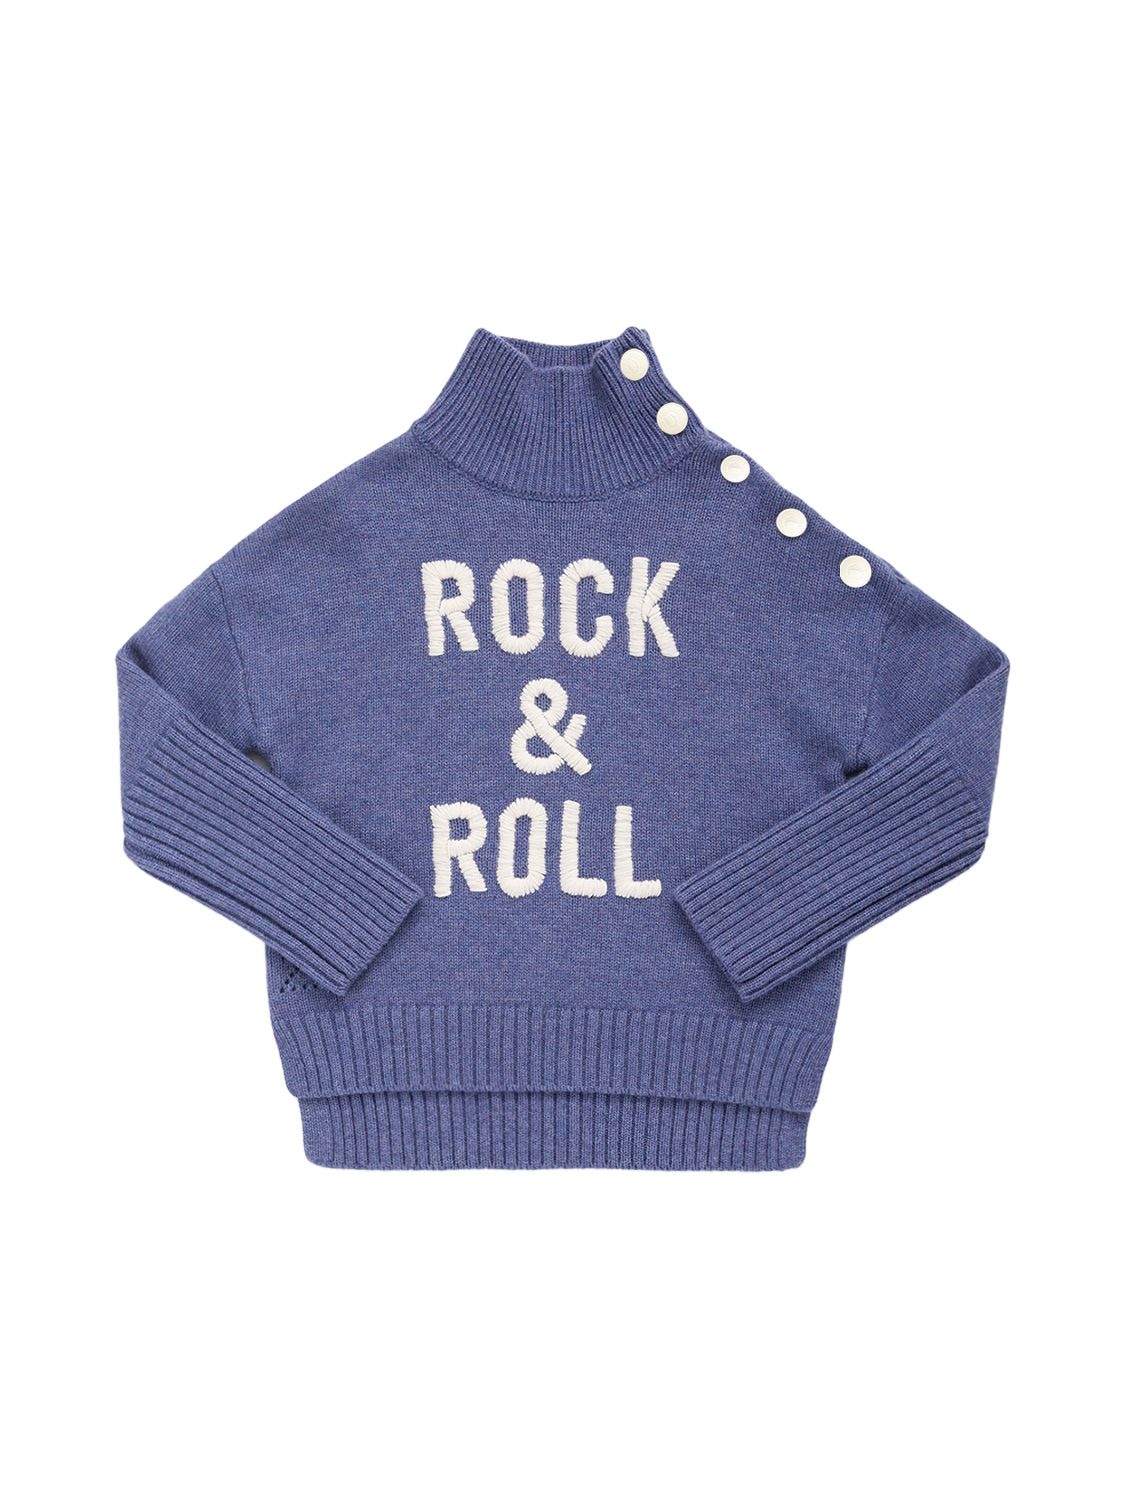 Image of Embroidered Wool Blend Knit Sweater